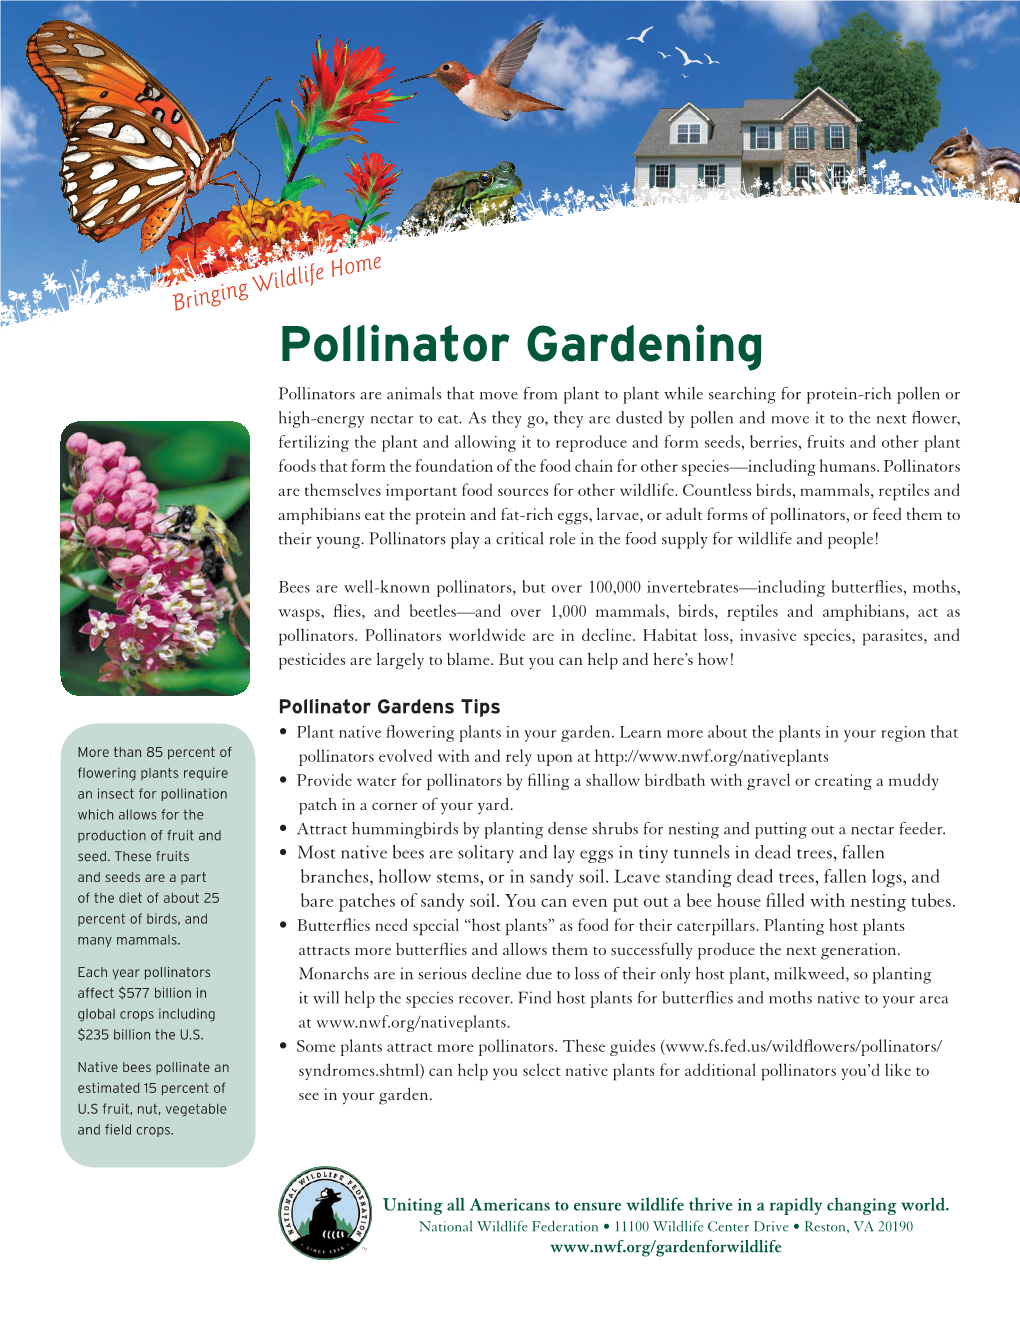 Pollinator Gardening Pollinators Are Animals That Move from Plant to Plant While Searching for Protein-Rich Pollen Or High-Energy Nectar to Eat